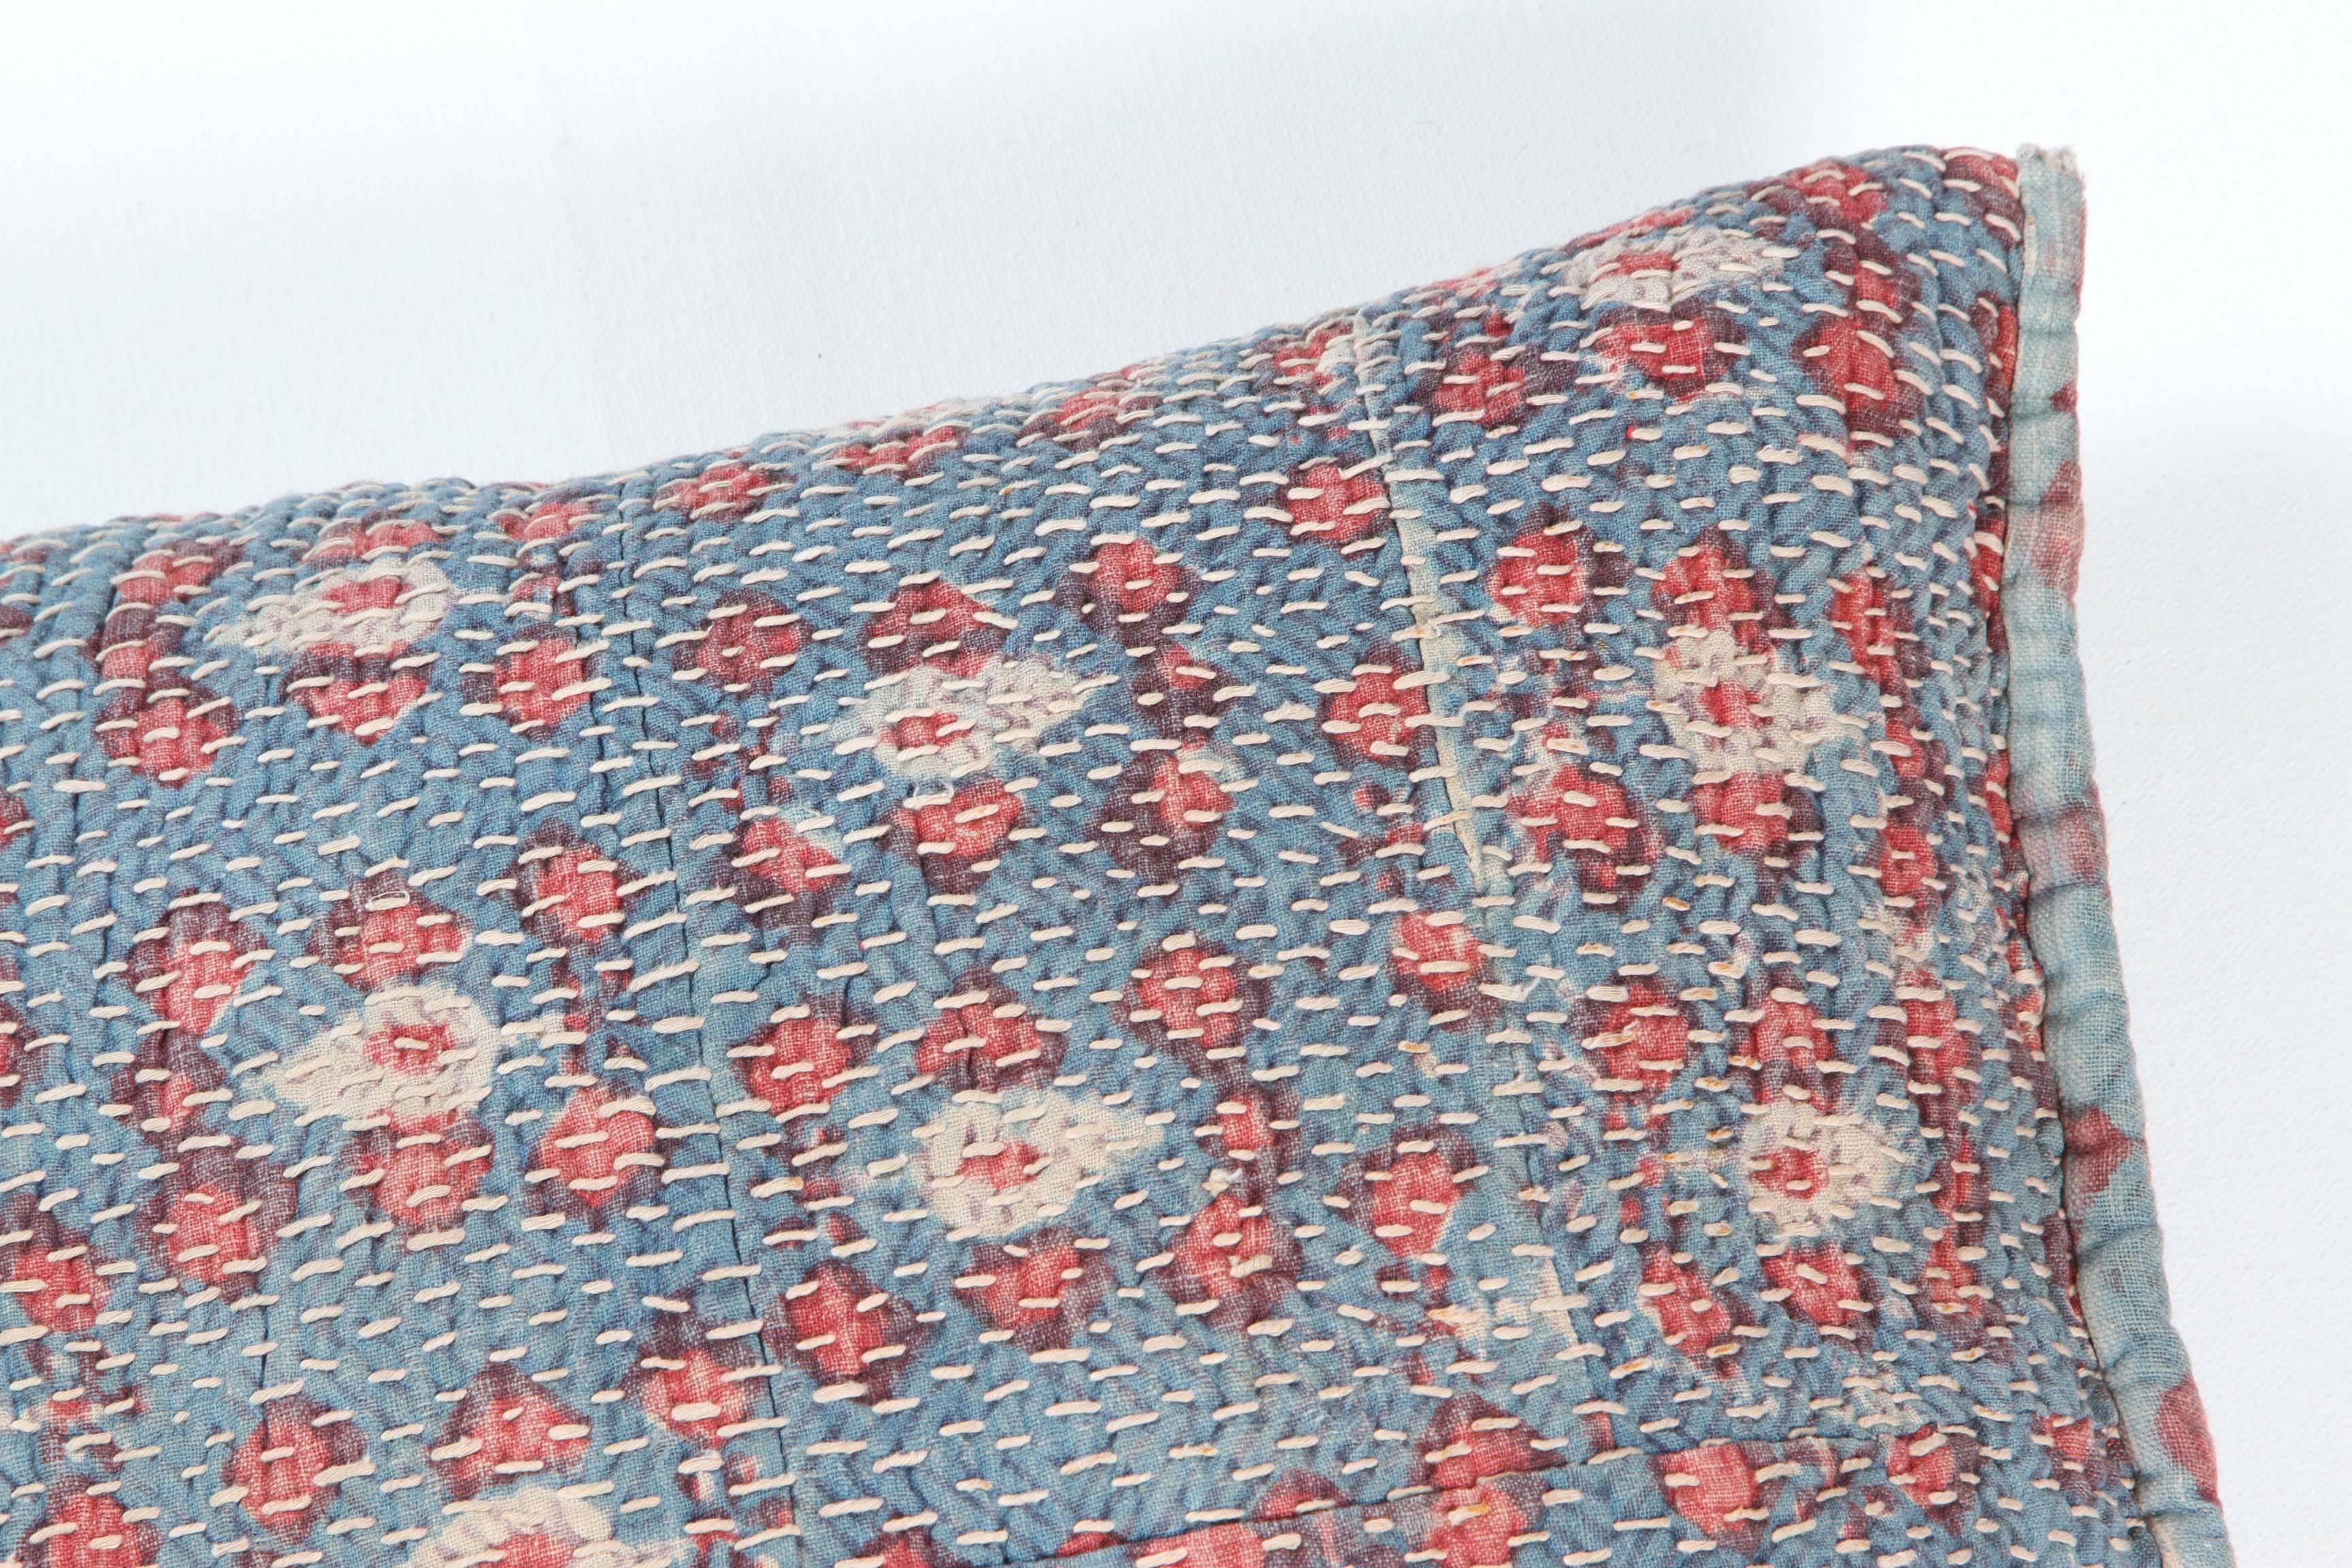 Vintage cotton block printed textile with all-over hand quilting stitches. Used as a storage bag, it has been made into a double sided pillow or cushion with zipper closure, feather and down fill.